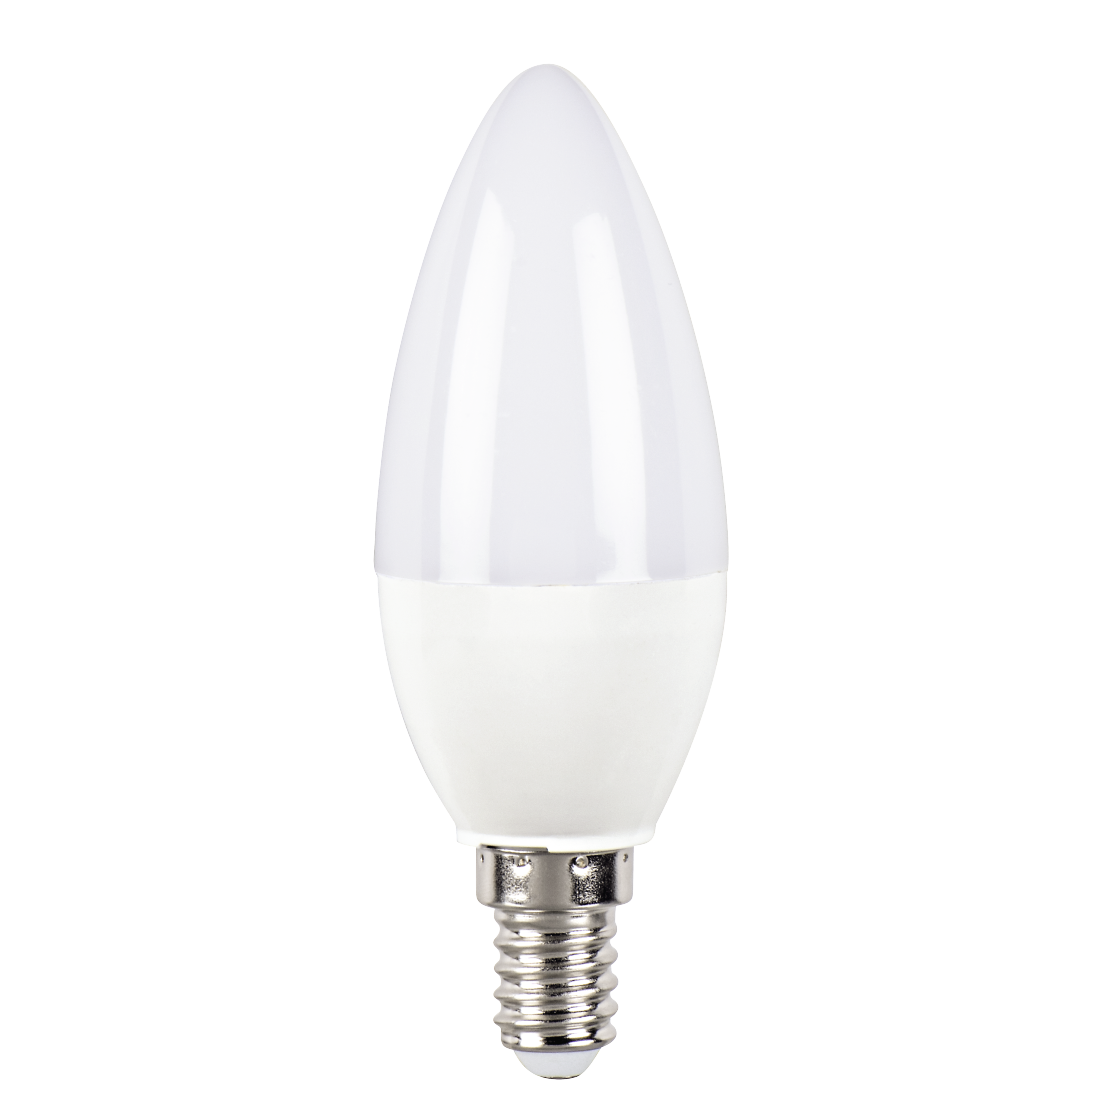 abx High-Res Image - Xavax, LED Bulb, E14, 470lm replaces 40W Candle Bulb, daylight